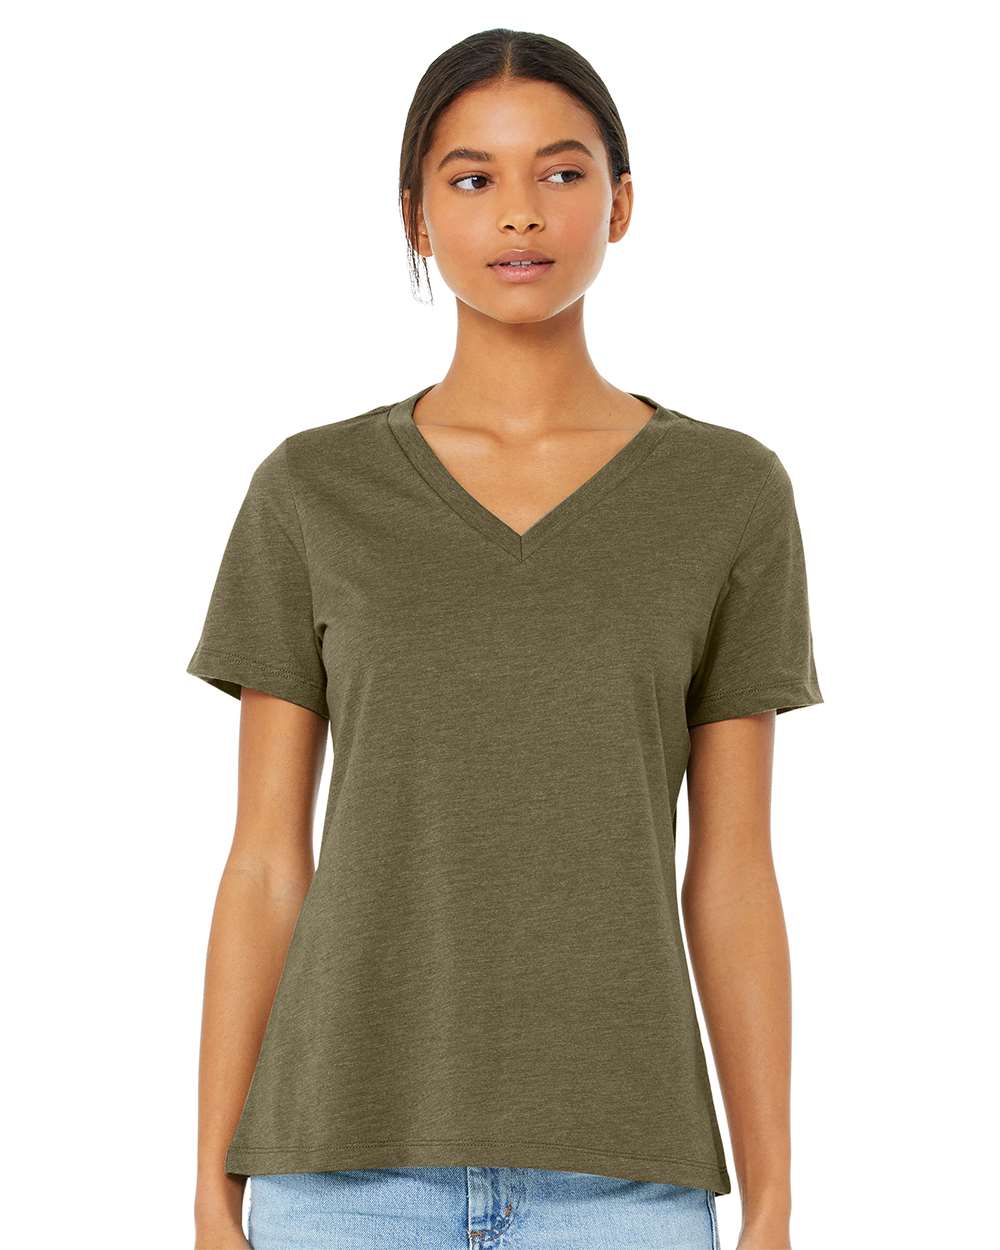 model wearing bella+canvas womens relaxed CVC v-neck tee in heather olive